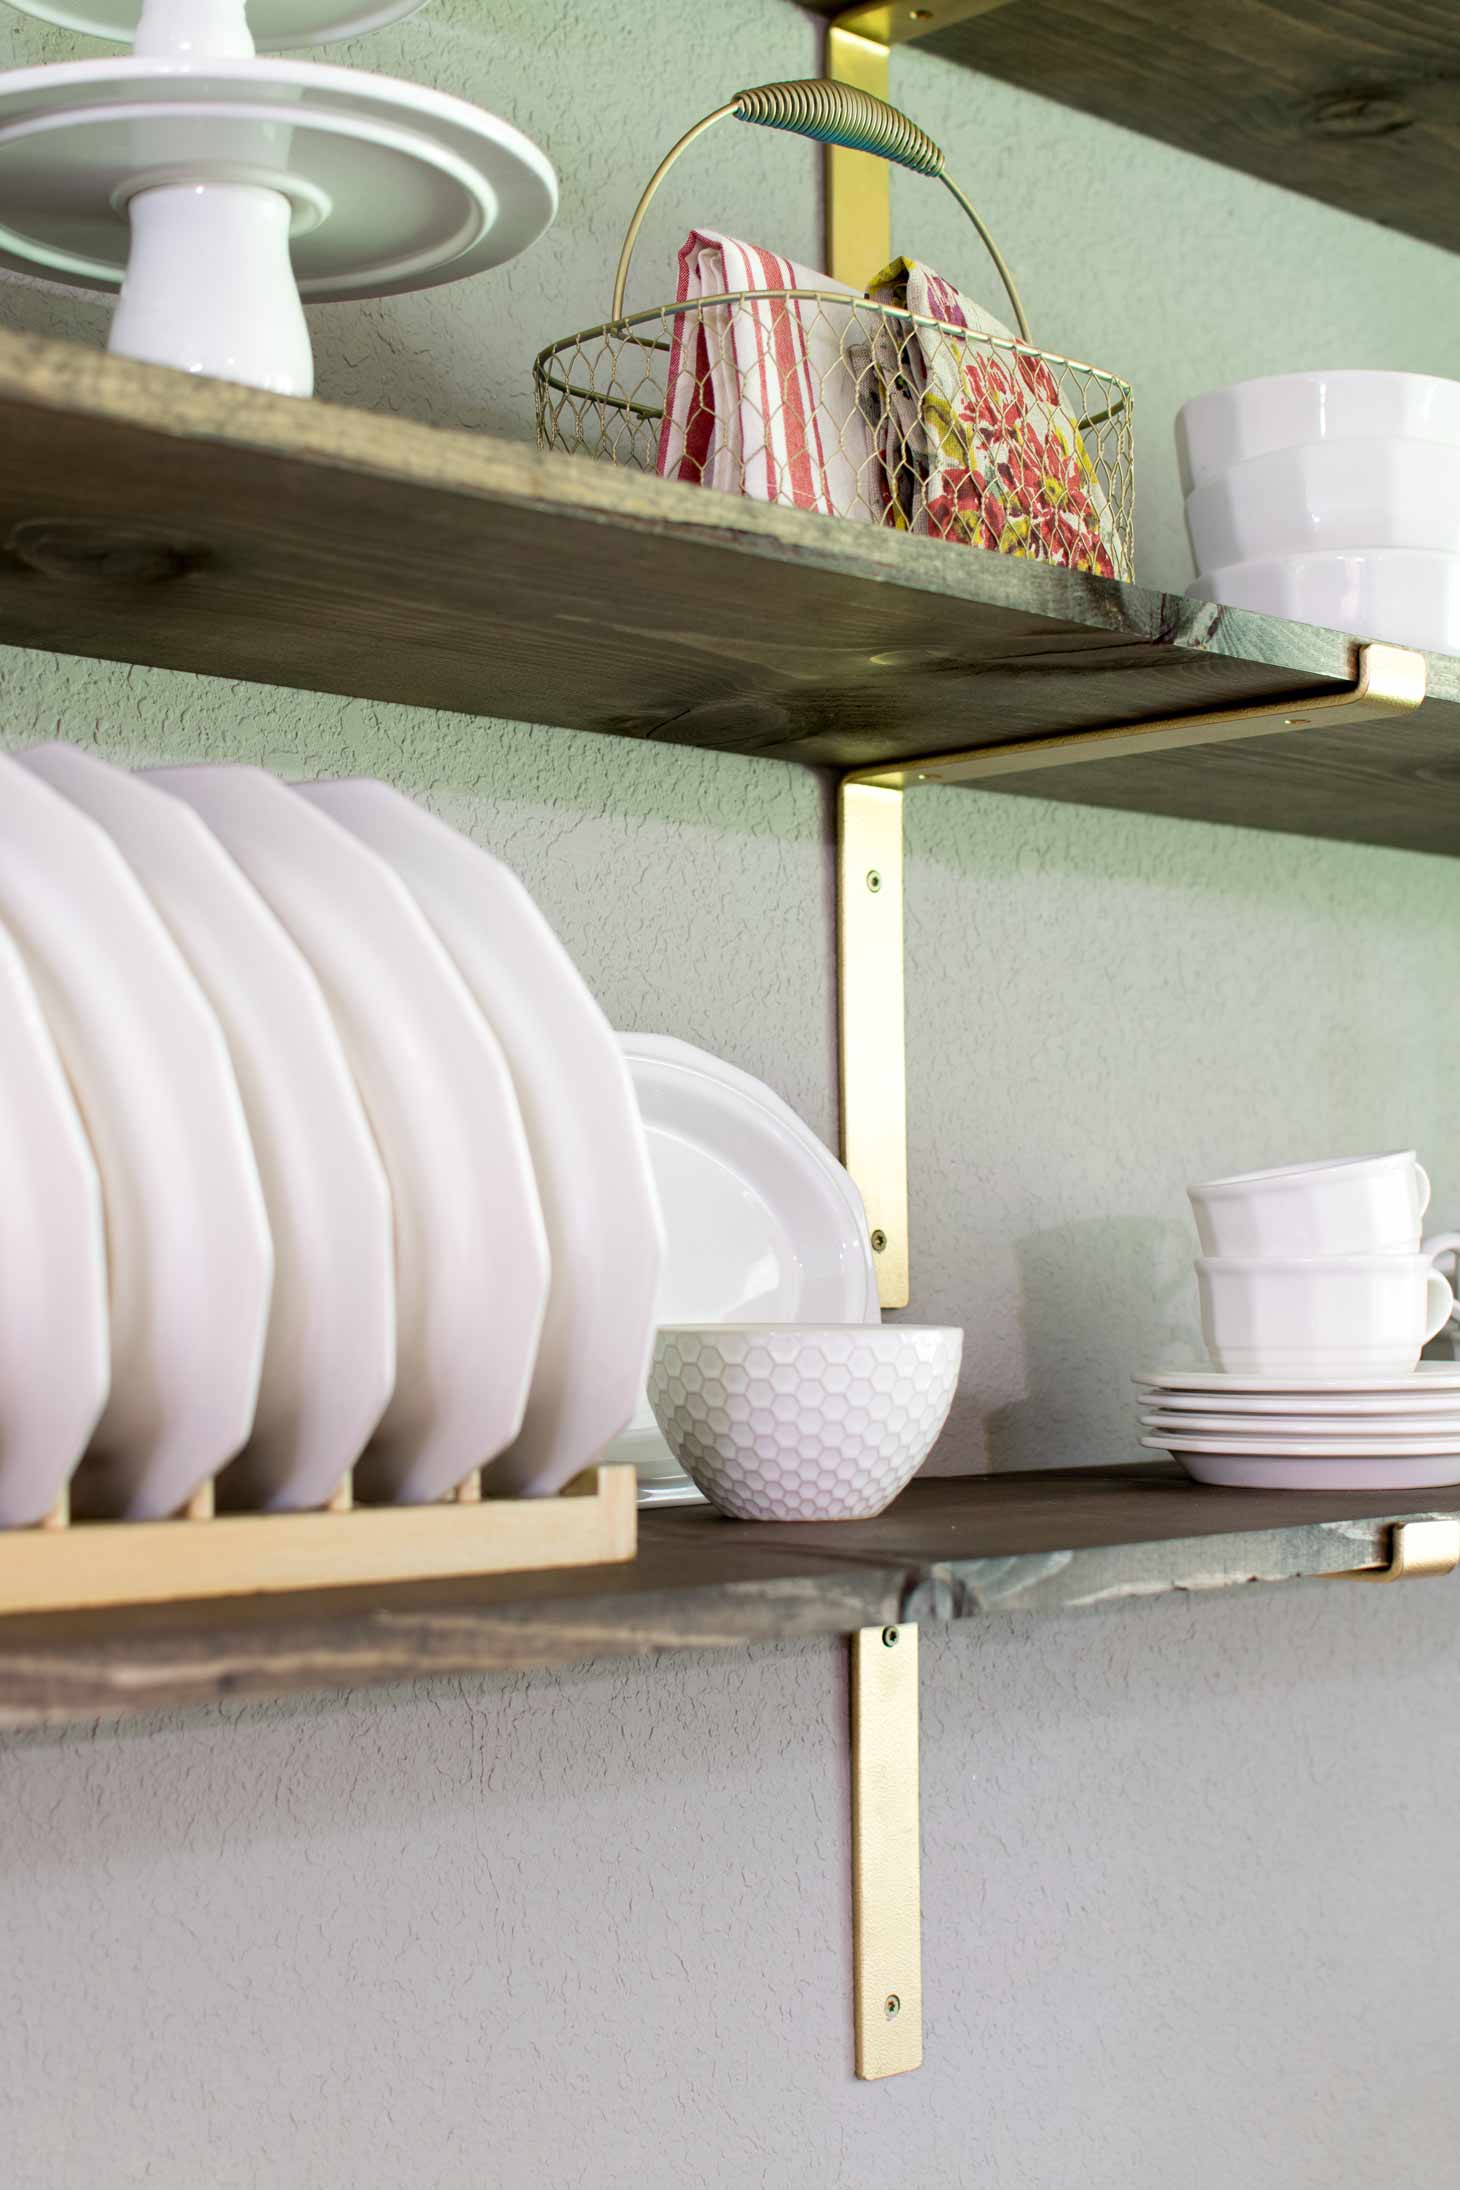 white dishes on rustic shelves in a breakfast room